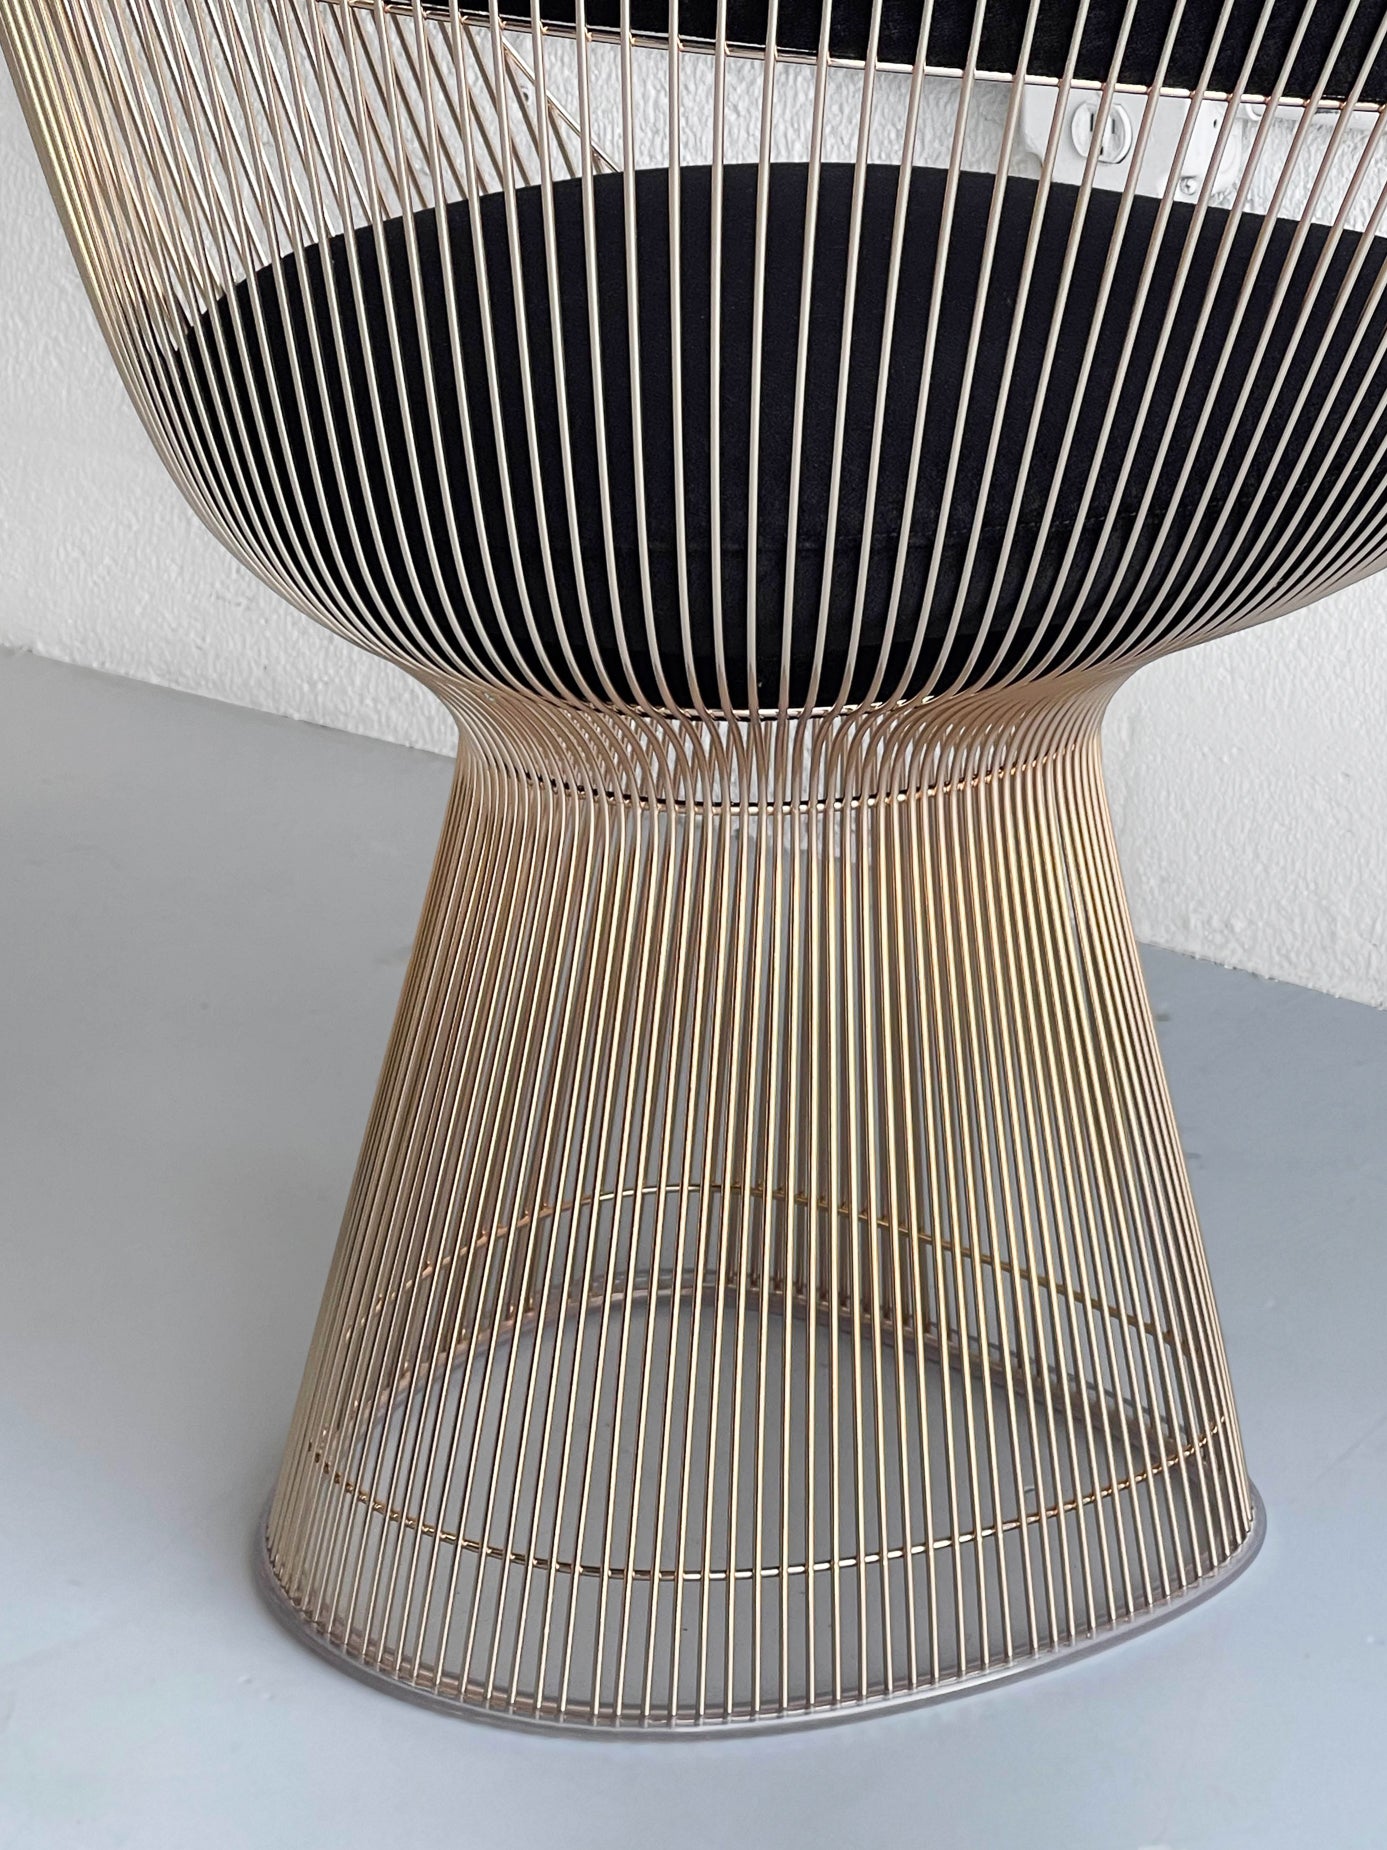 Set of 4 Gold Plated Platner Arm Chairs by Warren Platner for Knoll